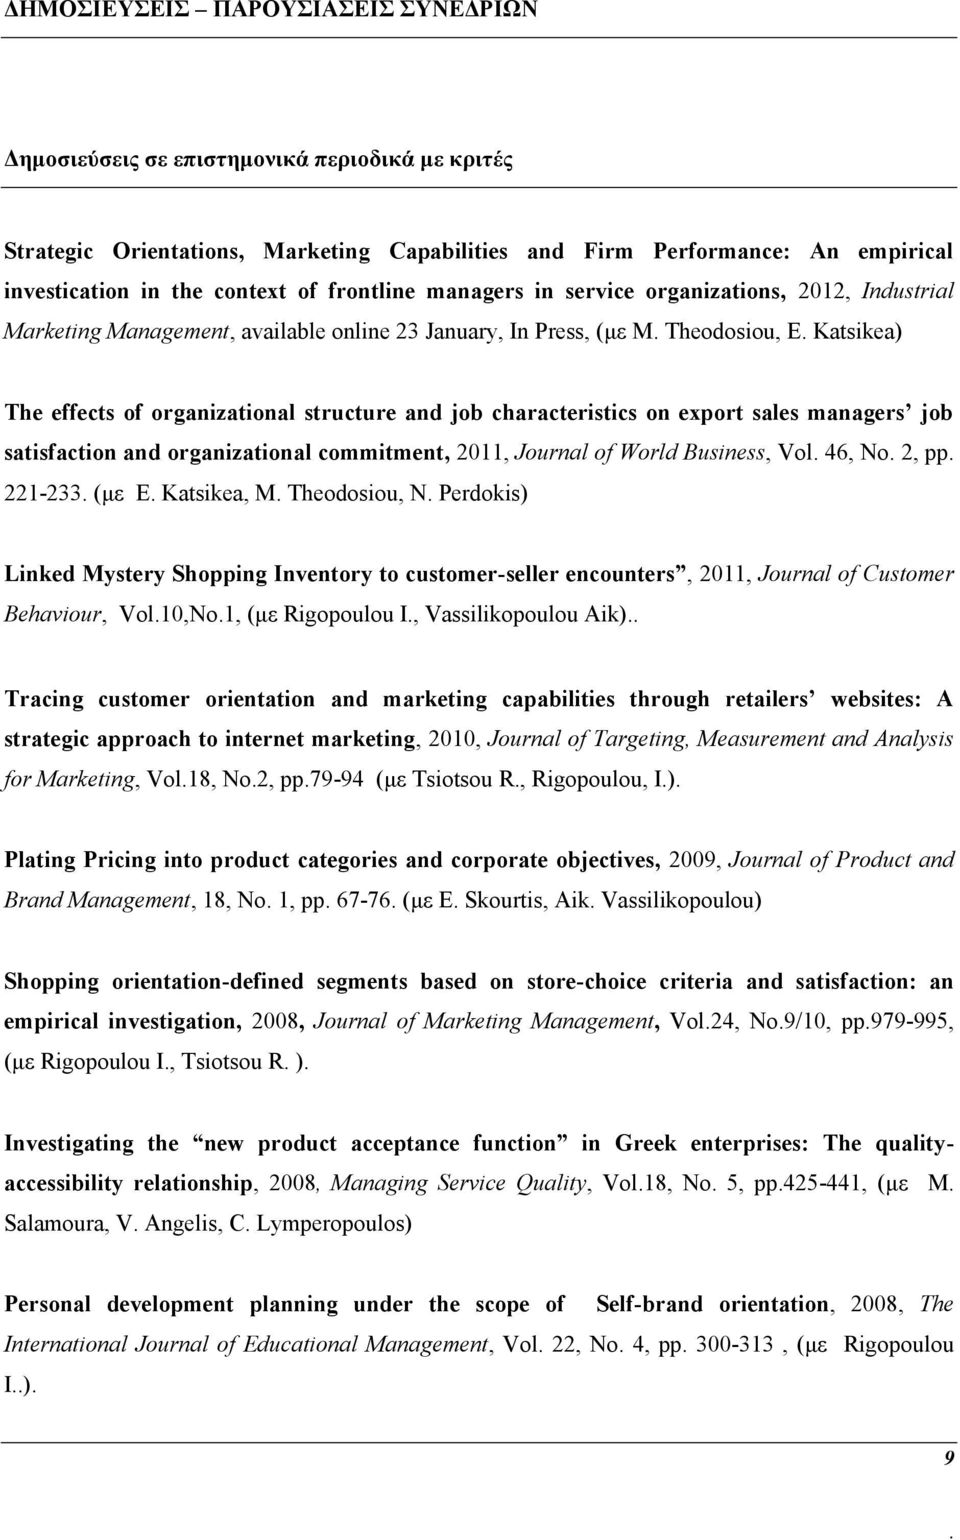 job characteristics on export sales managers job satisfaction and organizational commitment, 2011, Journal of World Business, Vol 46, No 2, pp 221-233 (με E Katsikea, M Theodosiou, N Perdokis) Linked